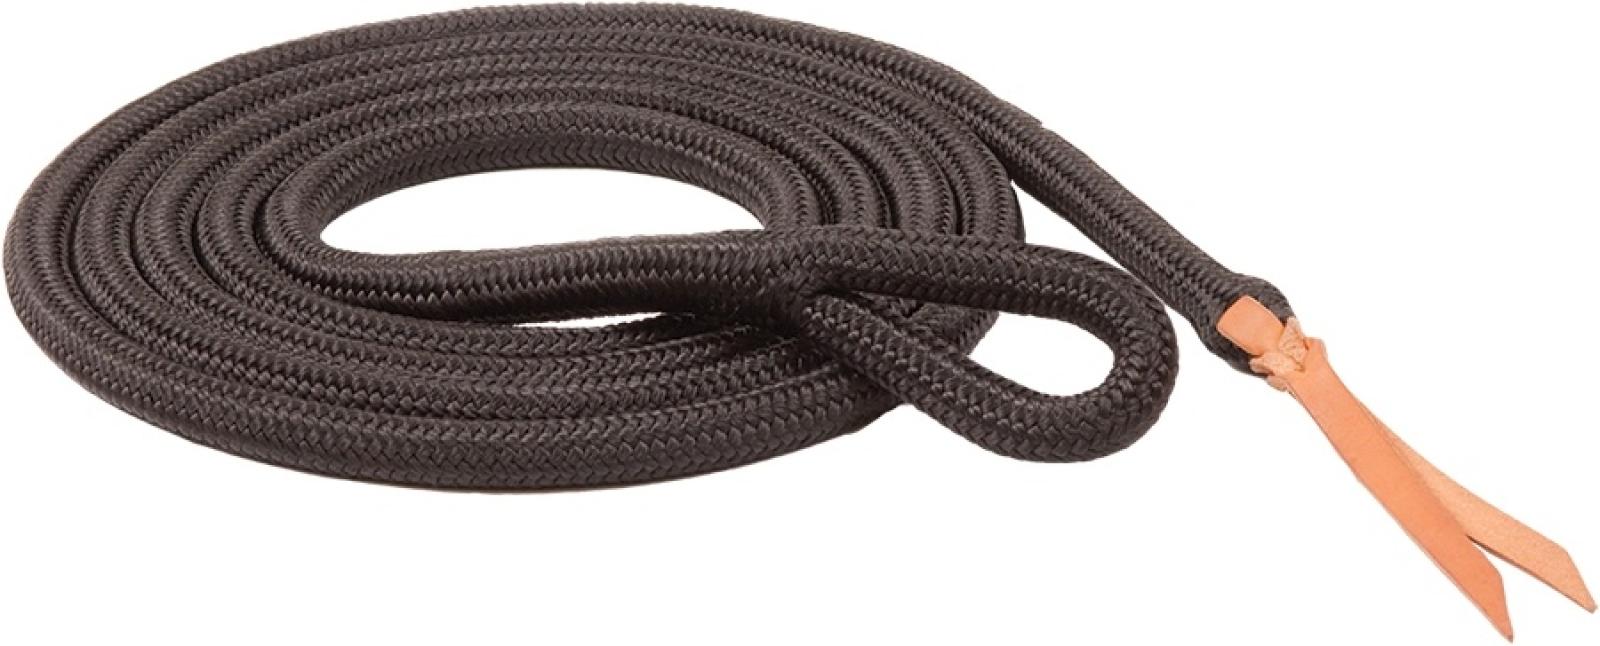 Mustang Tight Braided Lead